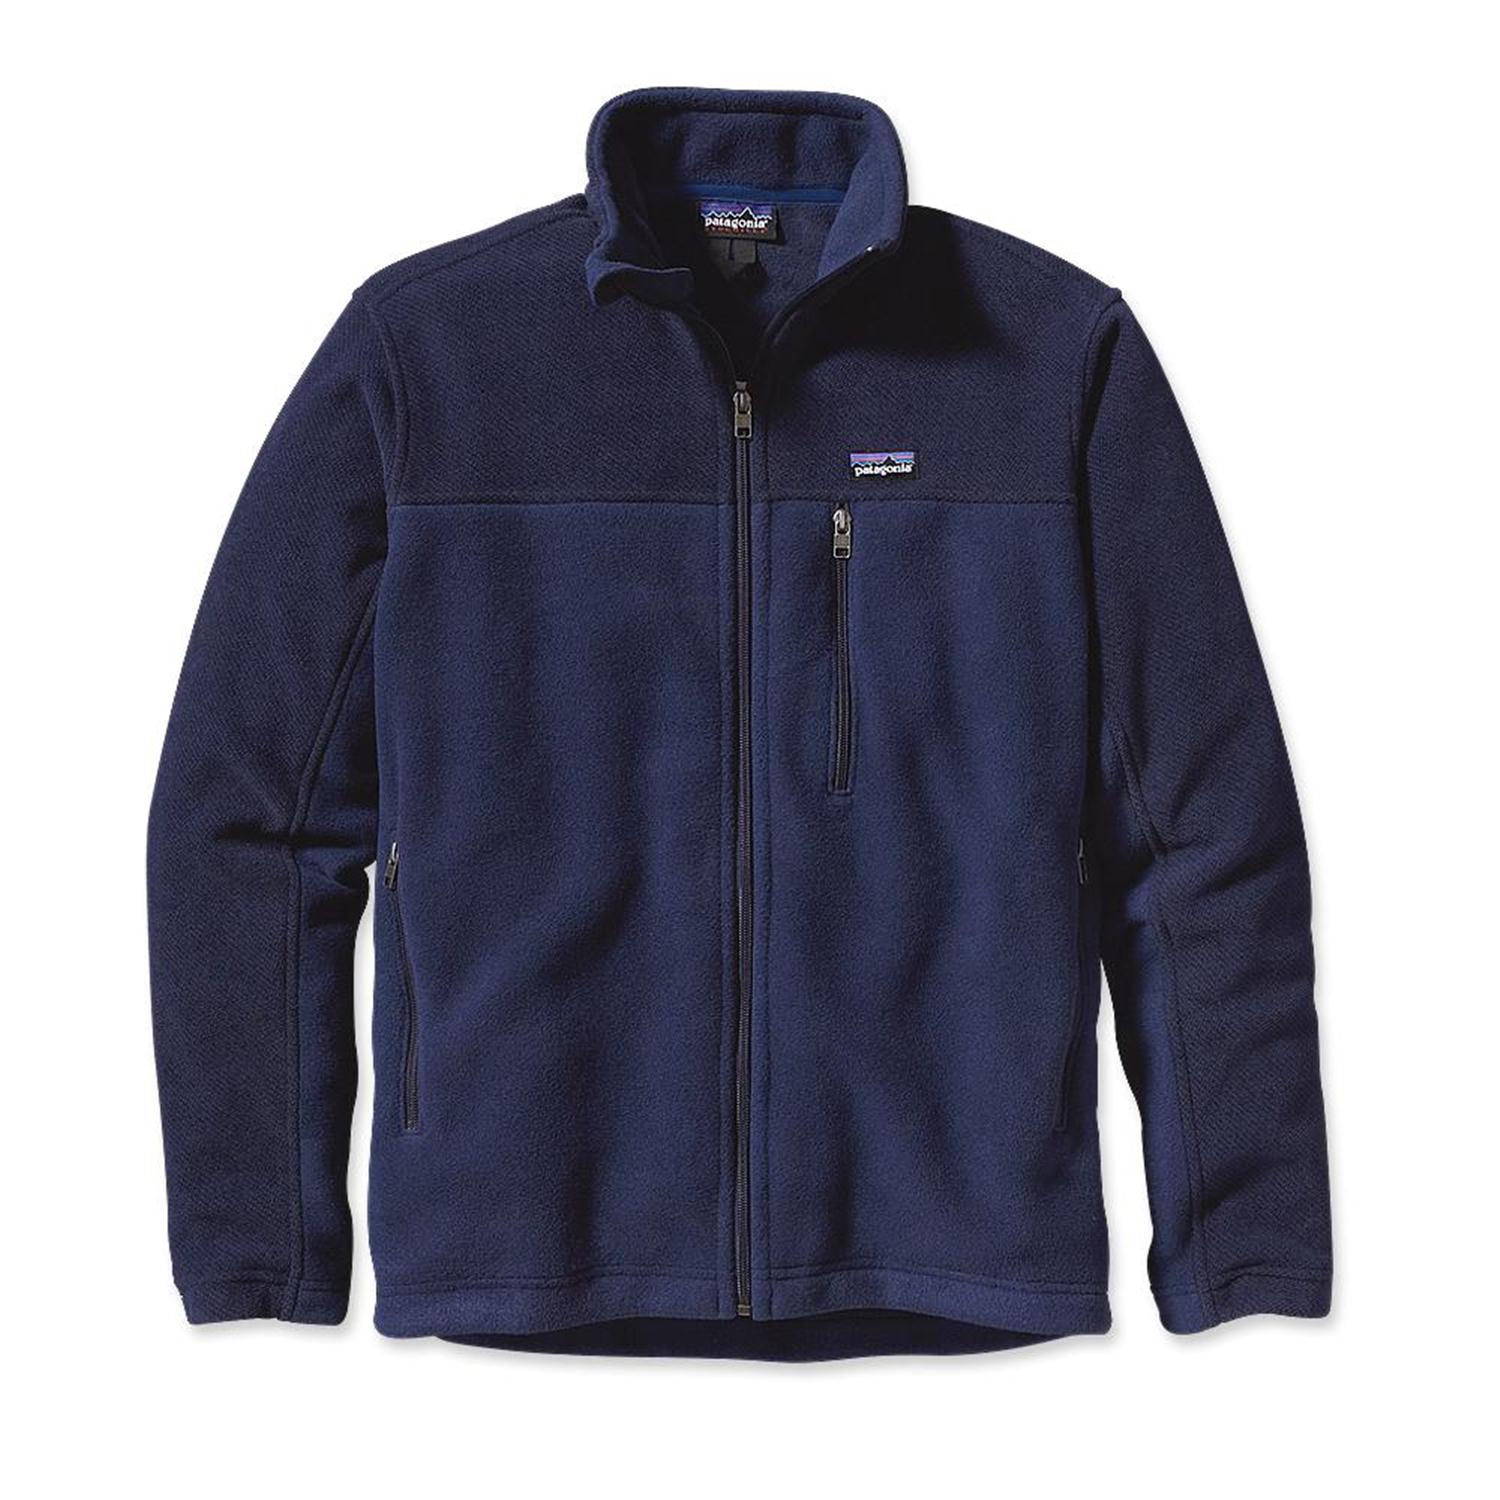 Patagonia Simple Synchilla Jacket | evo outlet